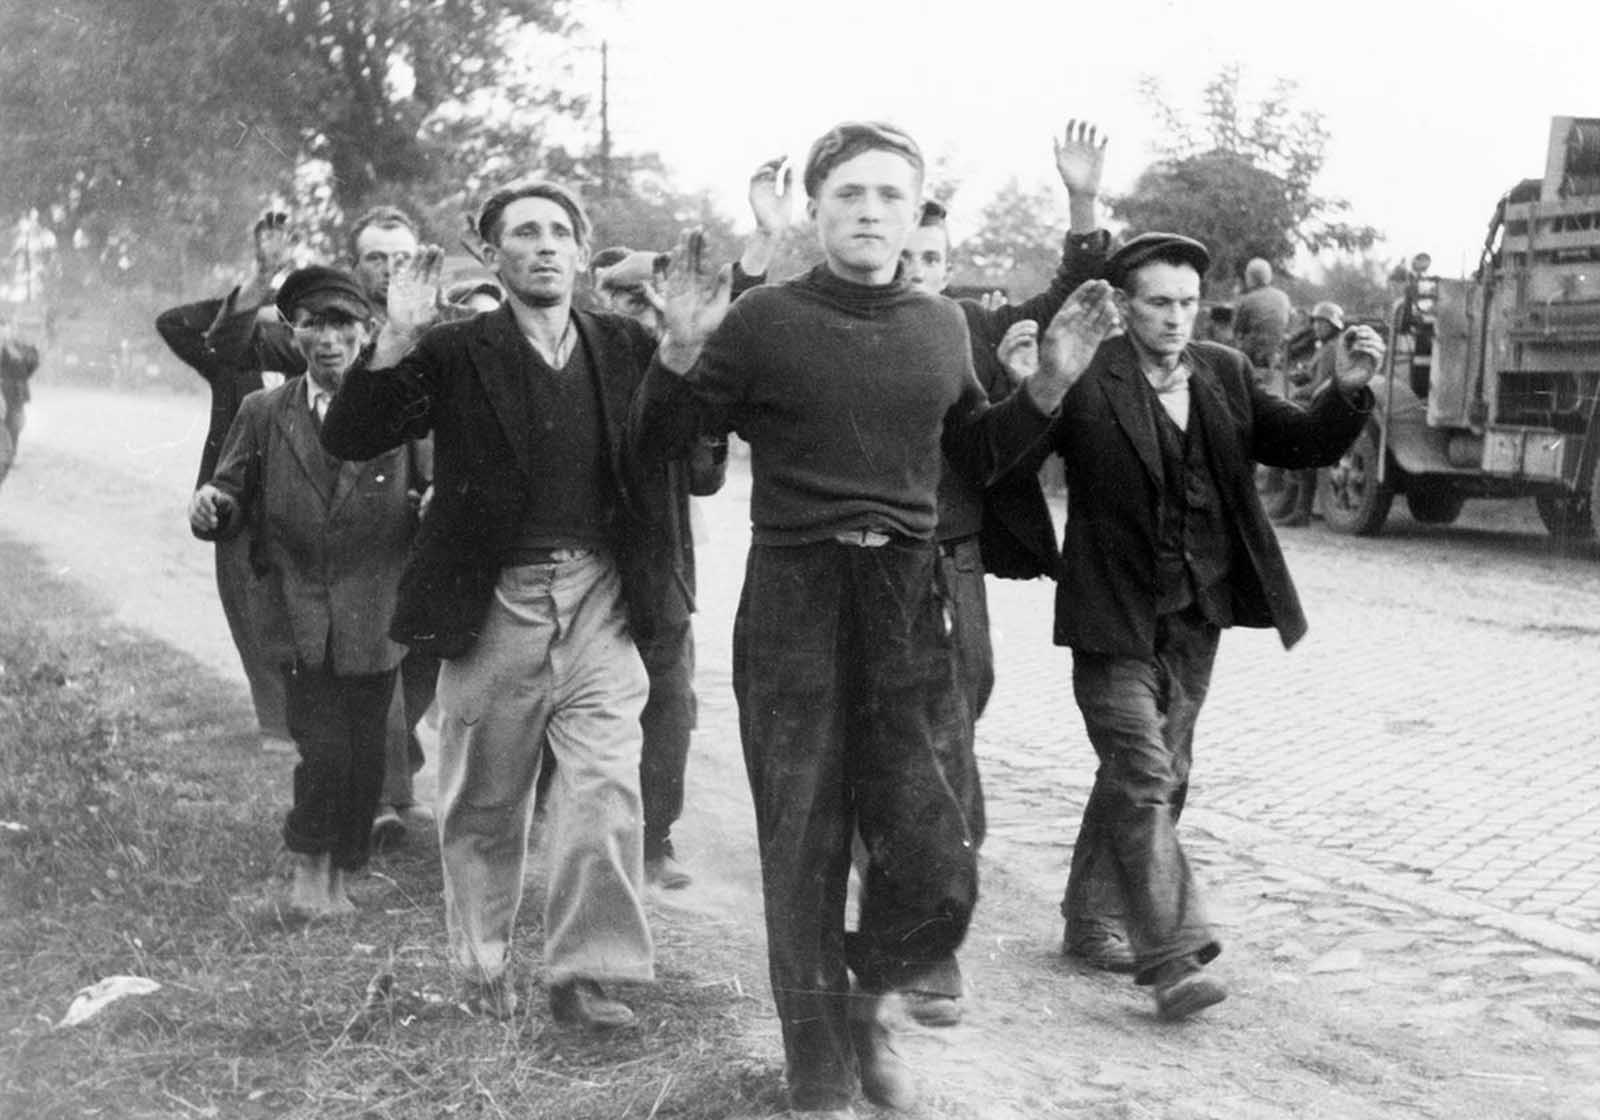 Several civilian prisoners of war, with arms raised, walk along a road during the German invasion of Poland in September of 1939.